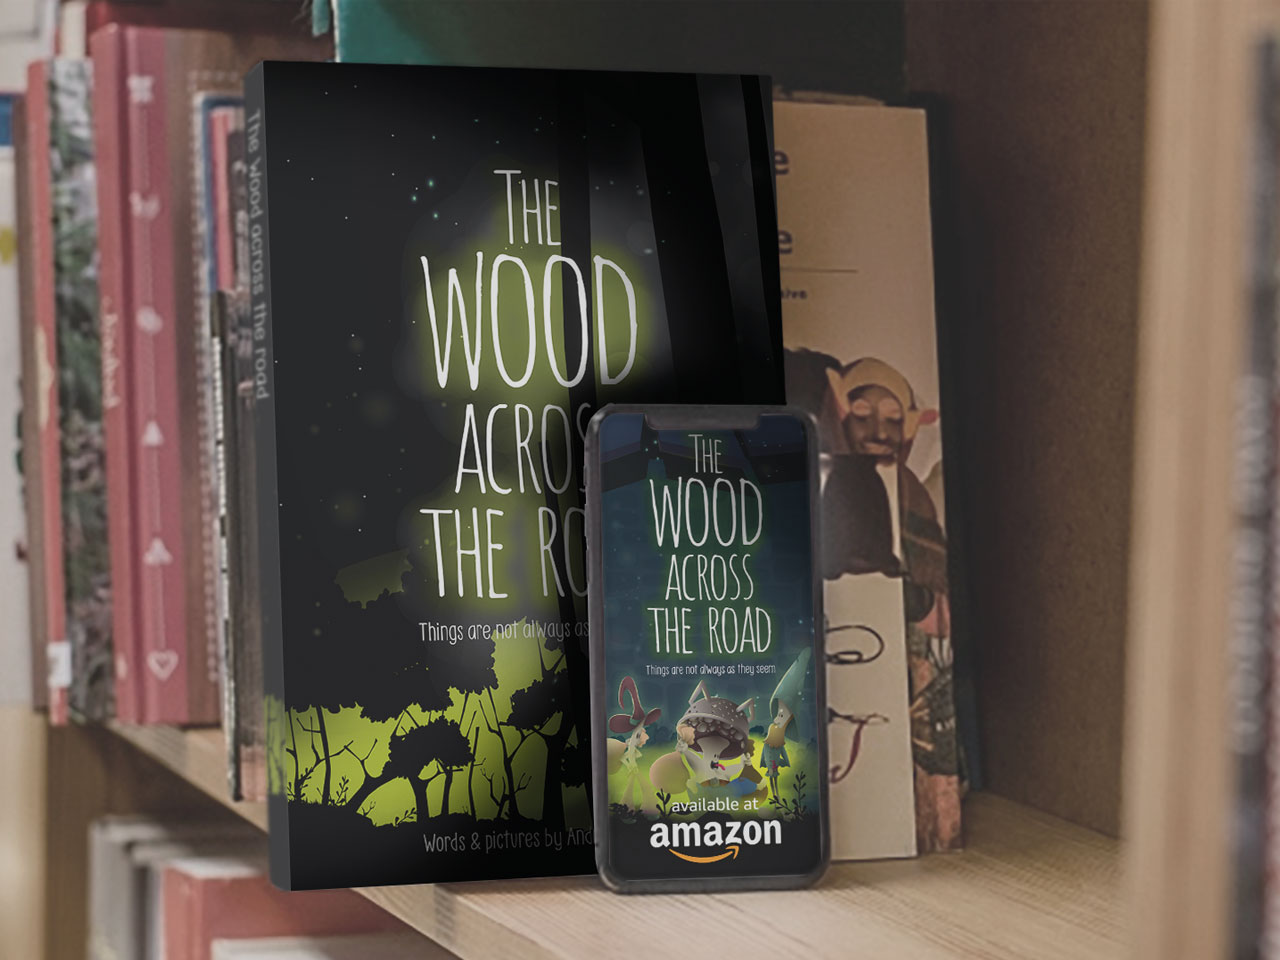 The Wood across the road - Amazon Book